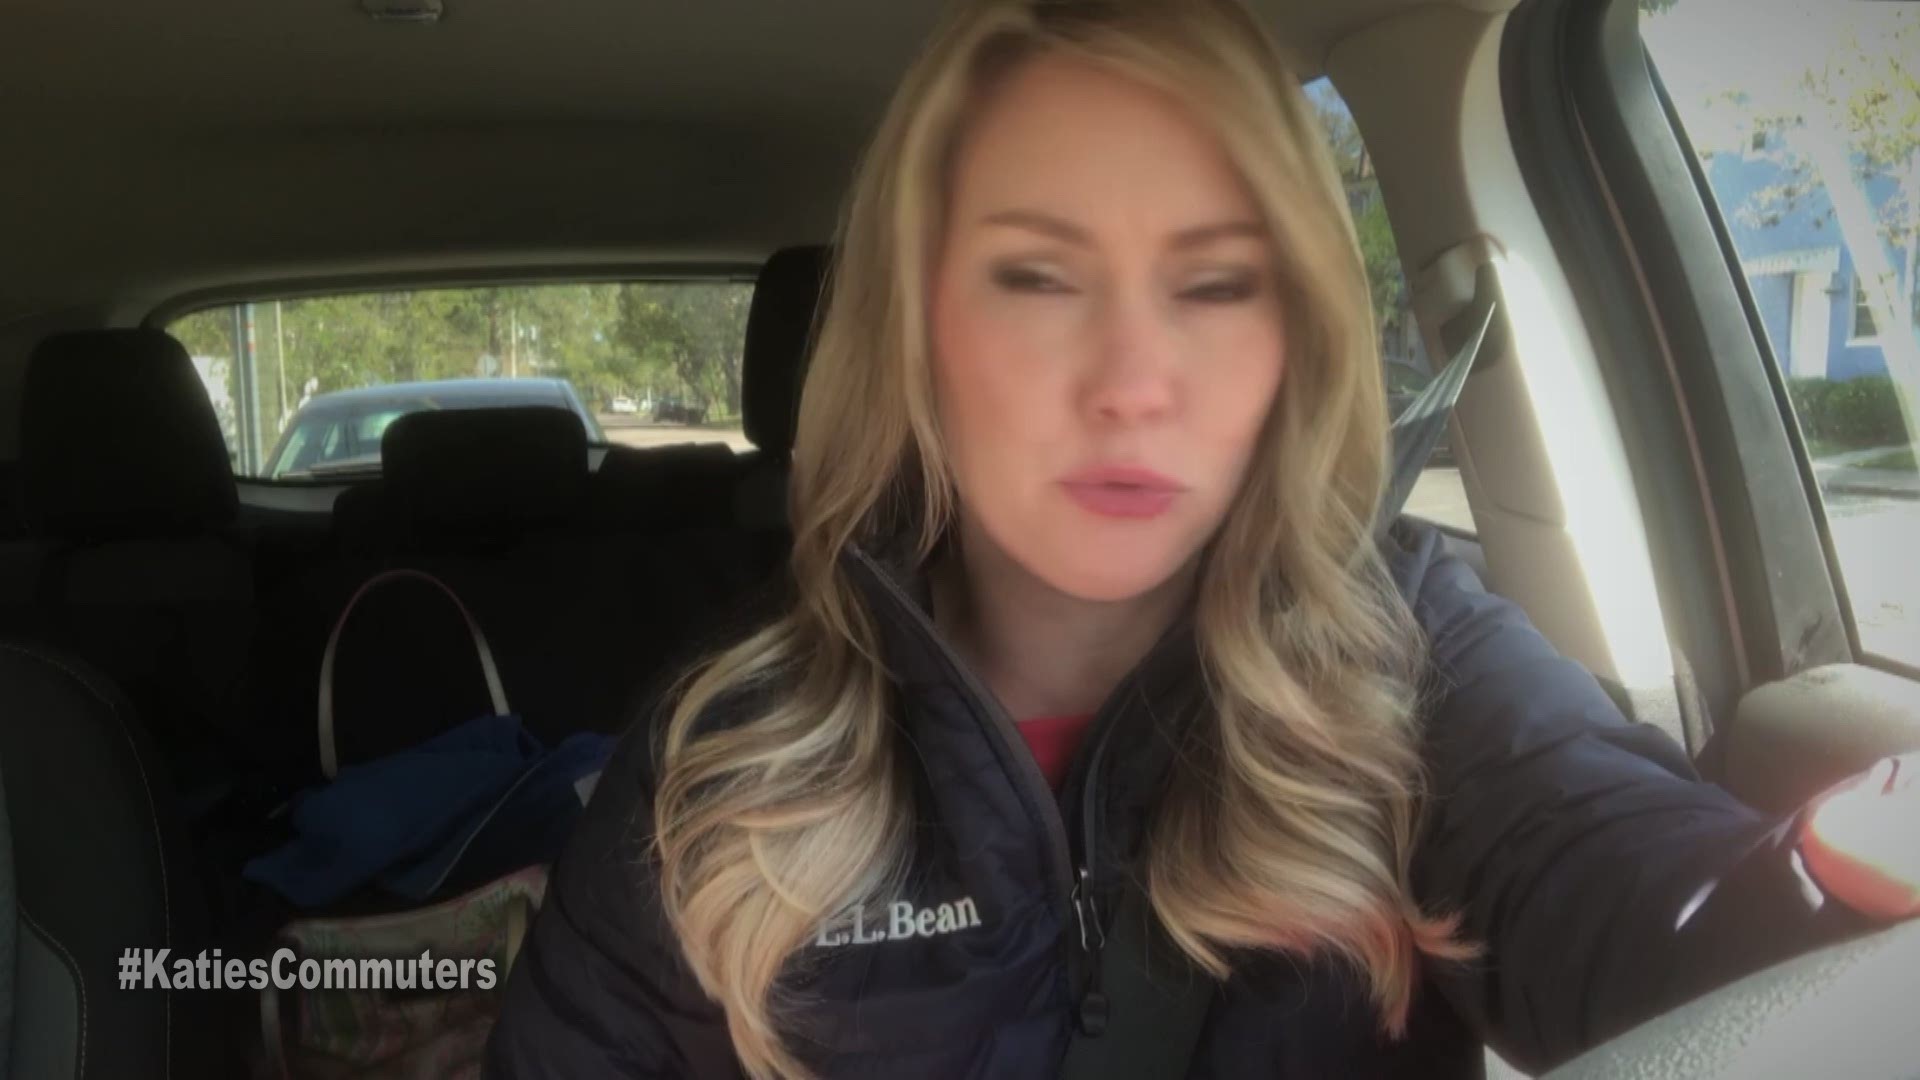 Nailed it! We're pretty sure one knows about Jacksonville traffic better than Katie Jeffries.